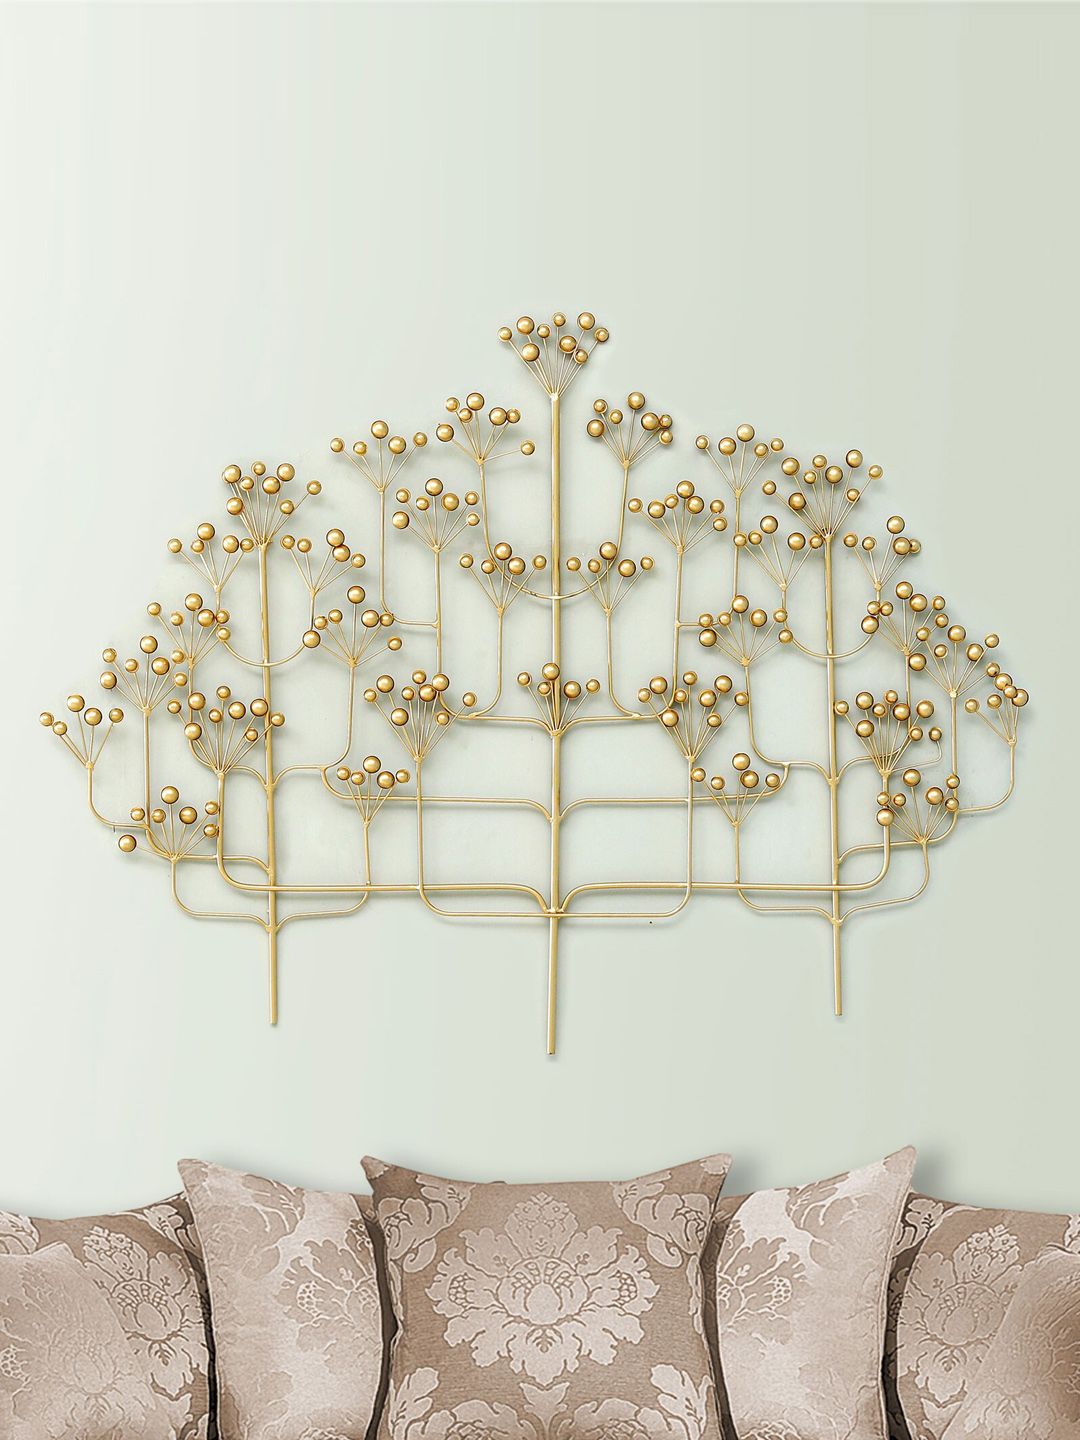 vedas Gold-Toned Arindam Tree Wall Decor Price in India